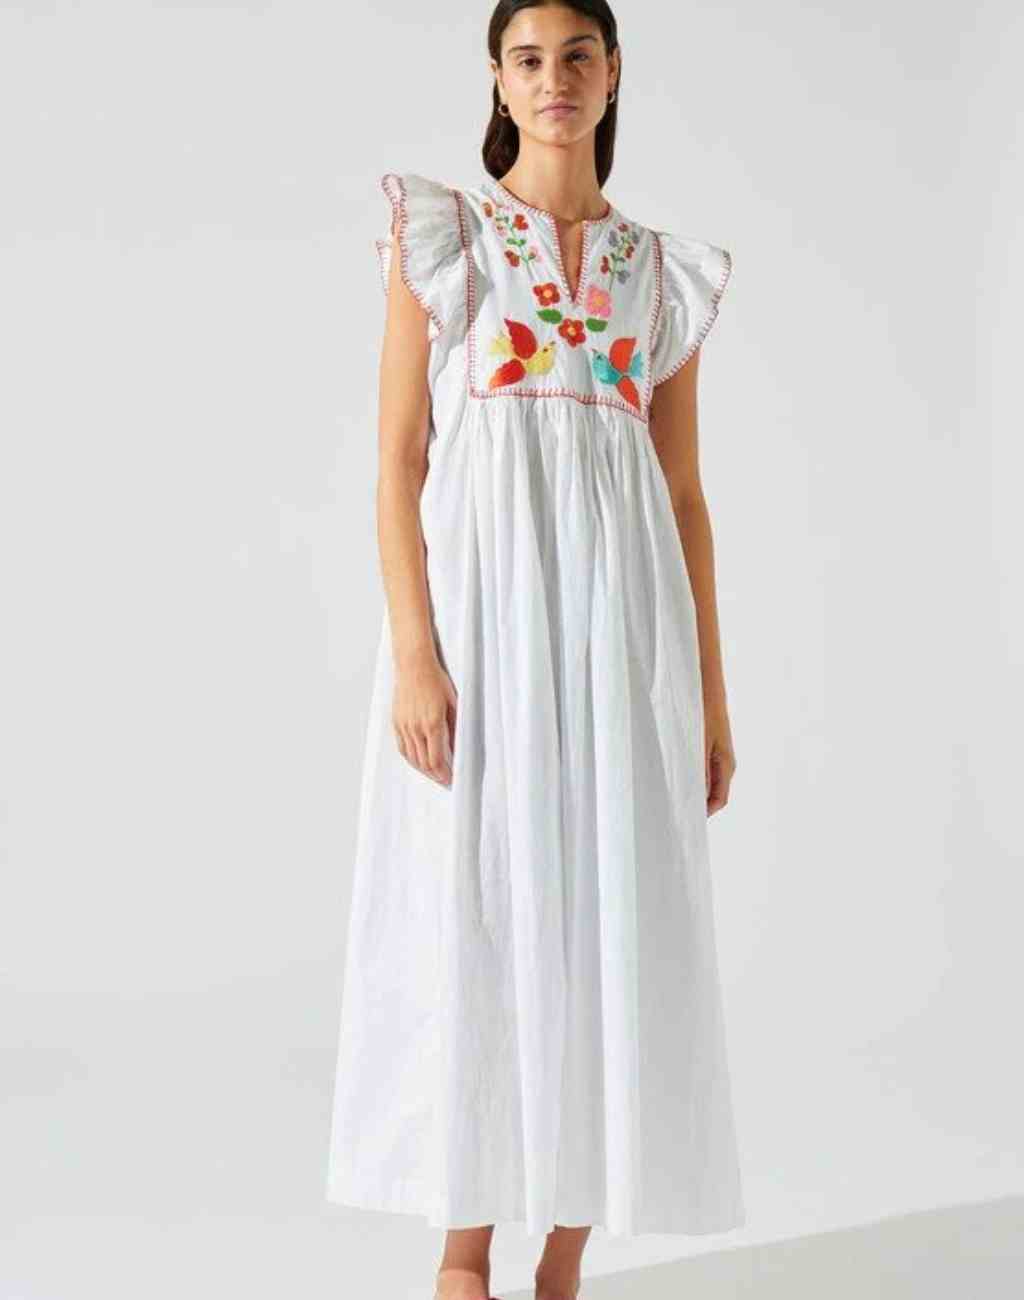 White Midi/Maxi Dress with Whimsical Embroidery and Flutter Sleeves - Visit Nifty Manoush 